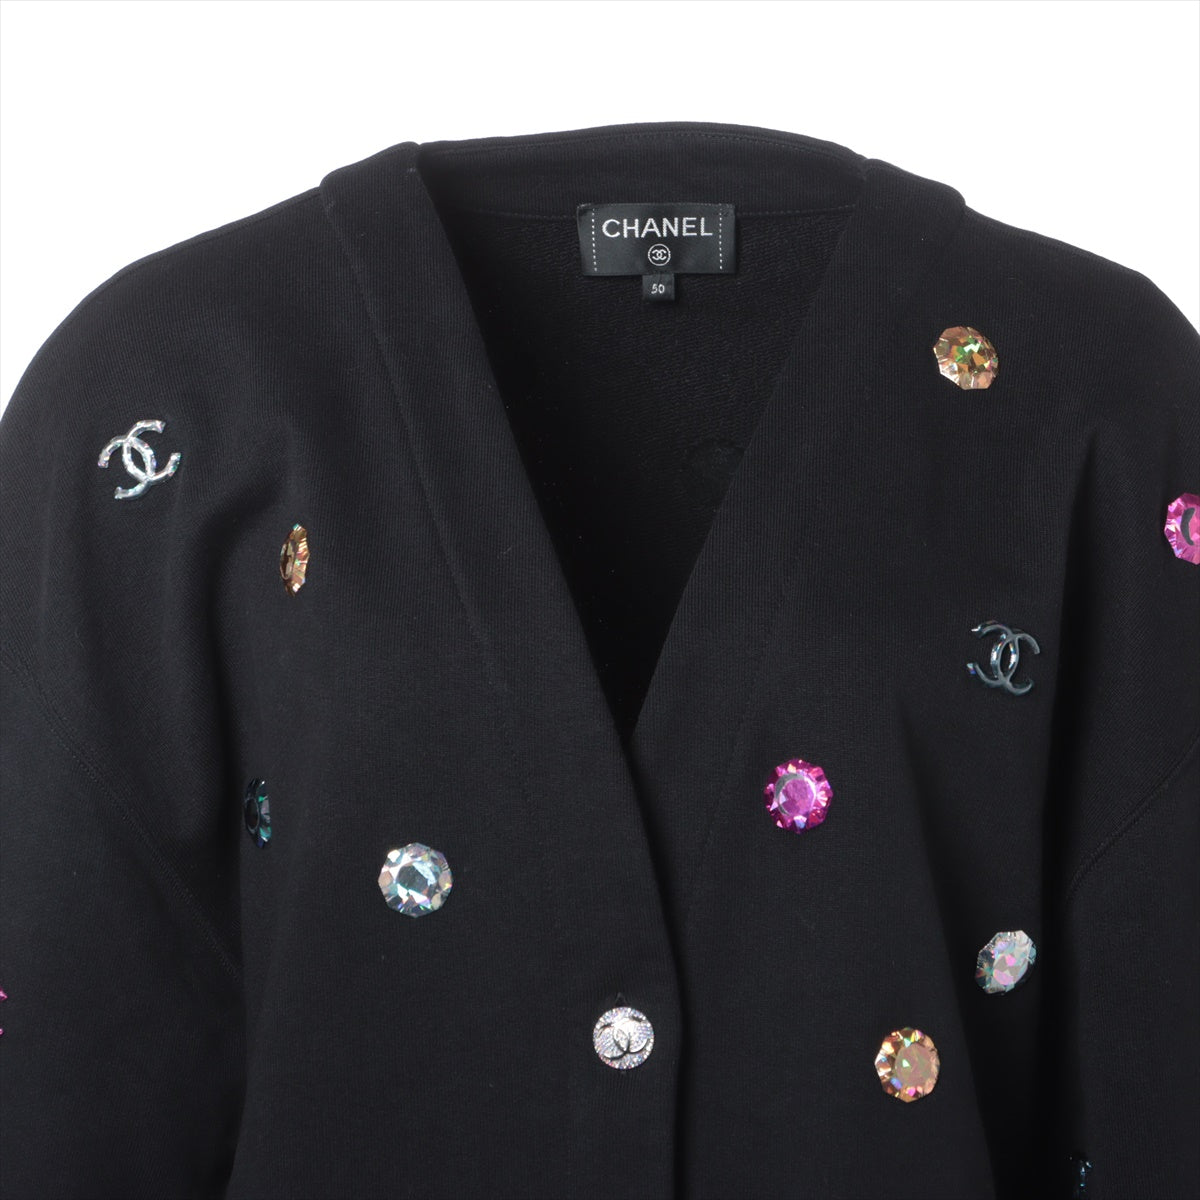 Chanel Coco Button P71 Cotton Cardigan 50 Ladies' Black  P71493K10289 There is a stone thread